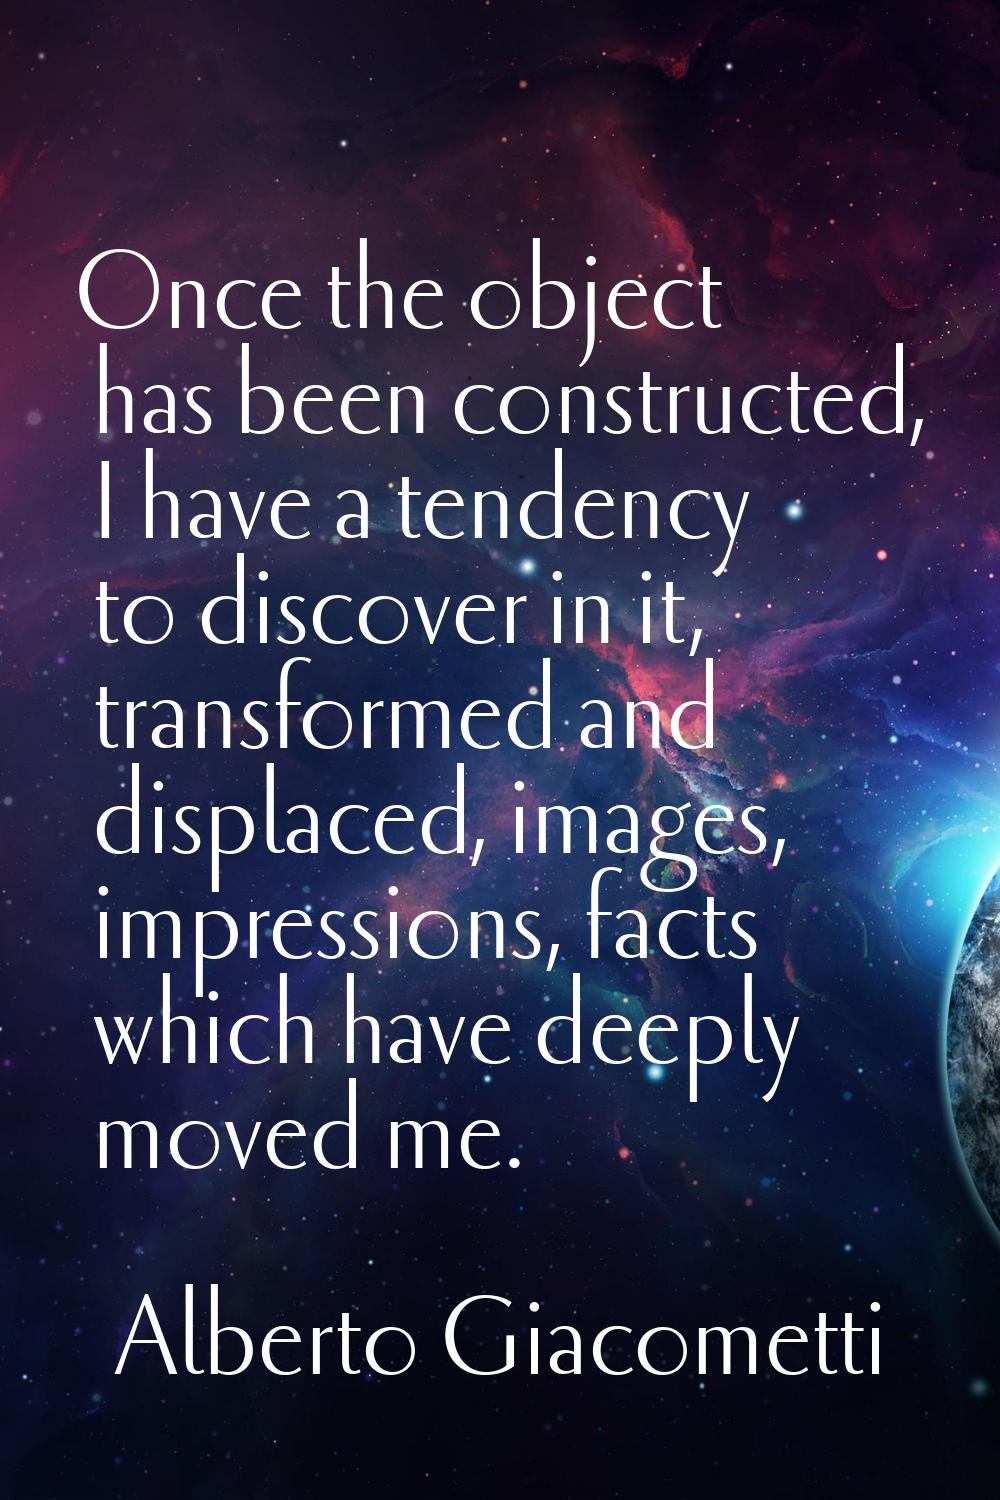 Once the object has been constructed, I have a tendency to discover in it, transformed and displace